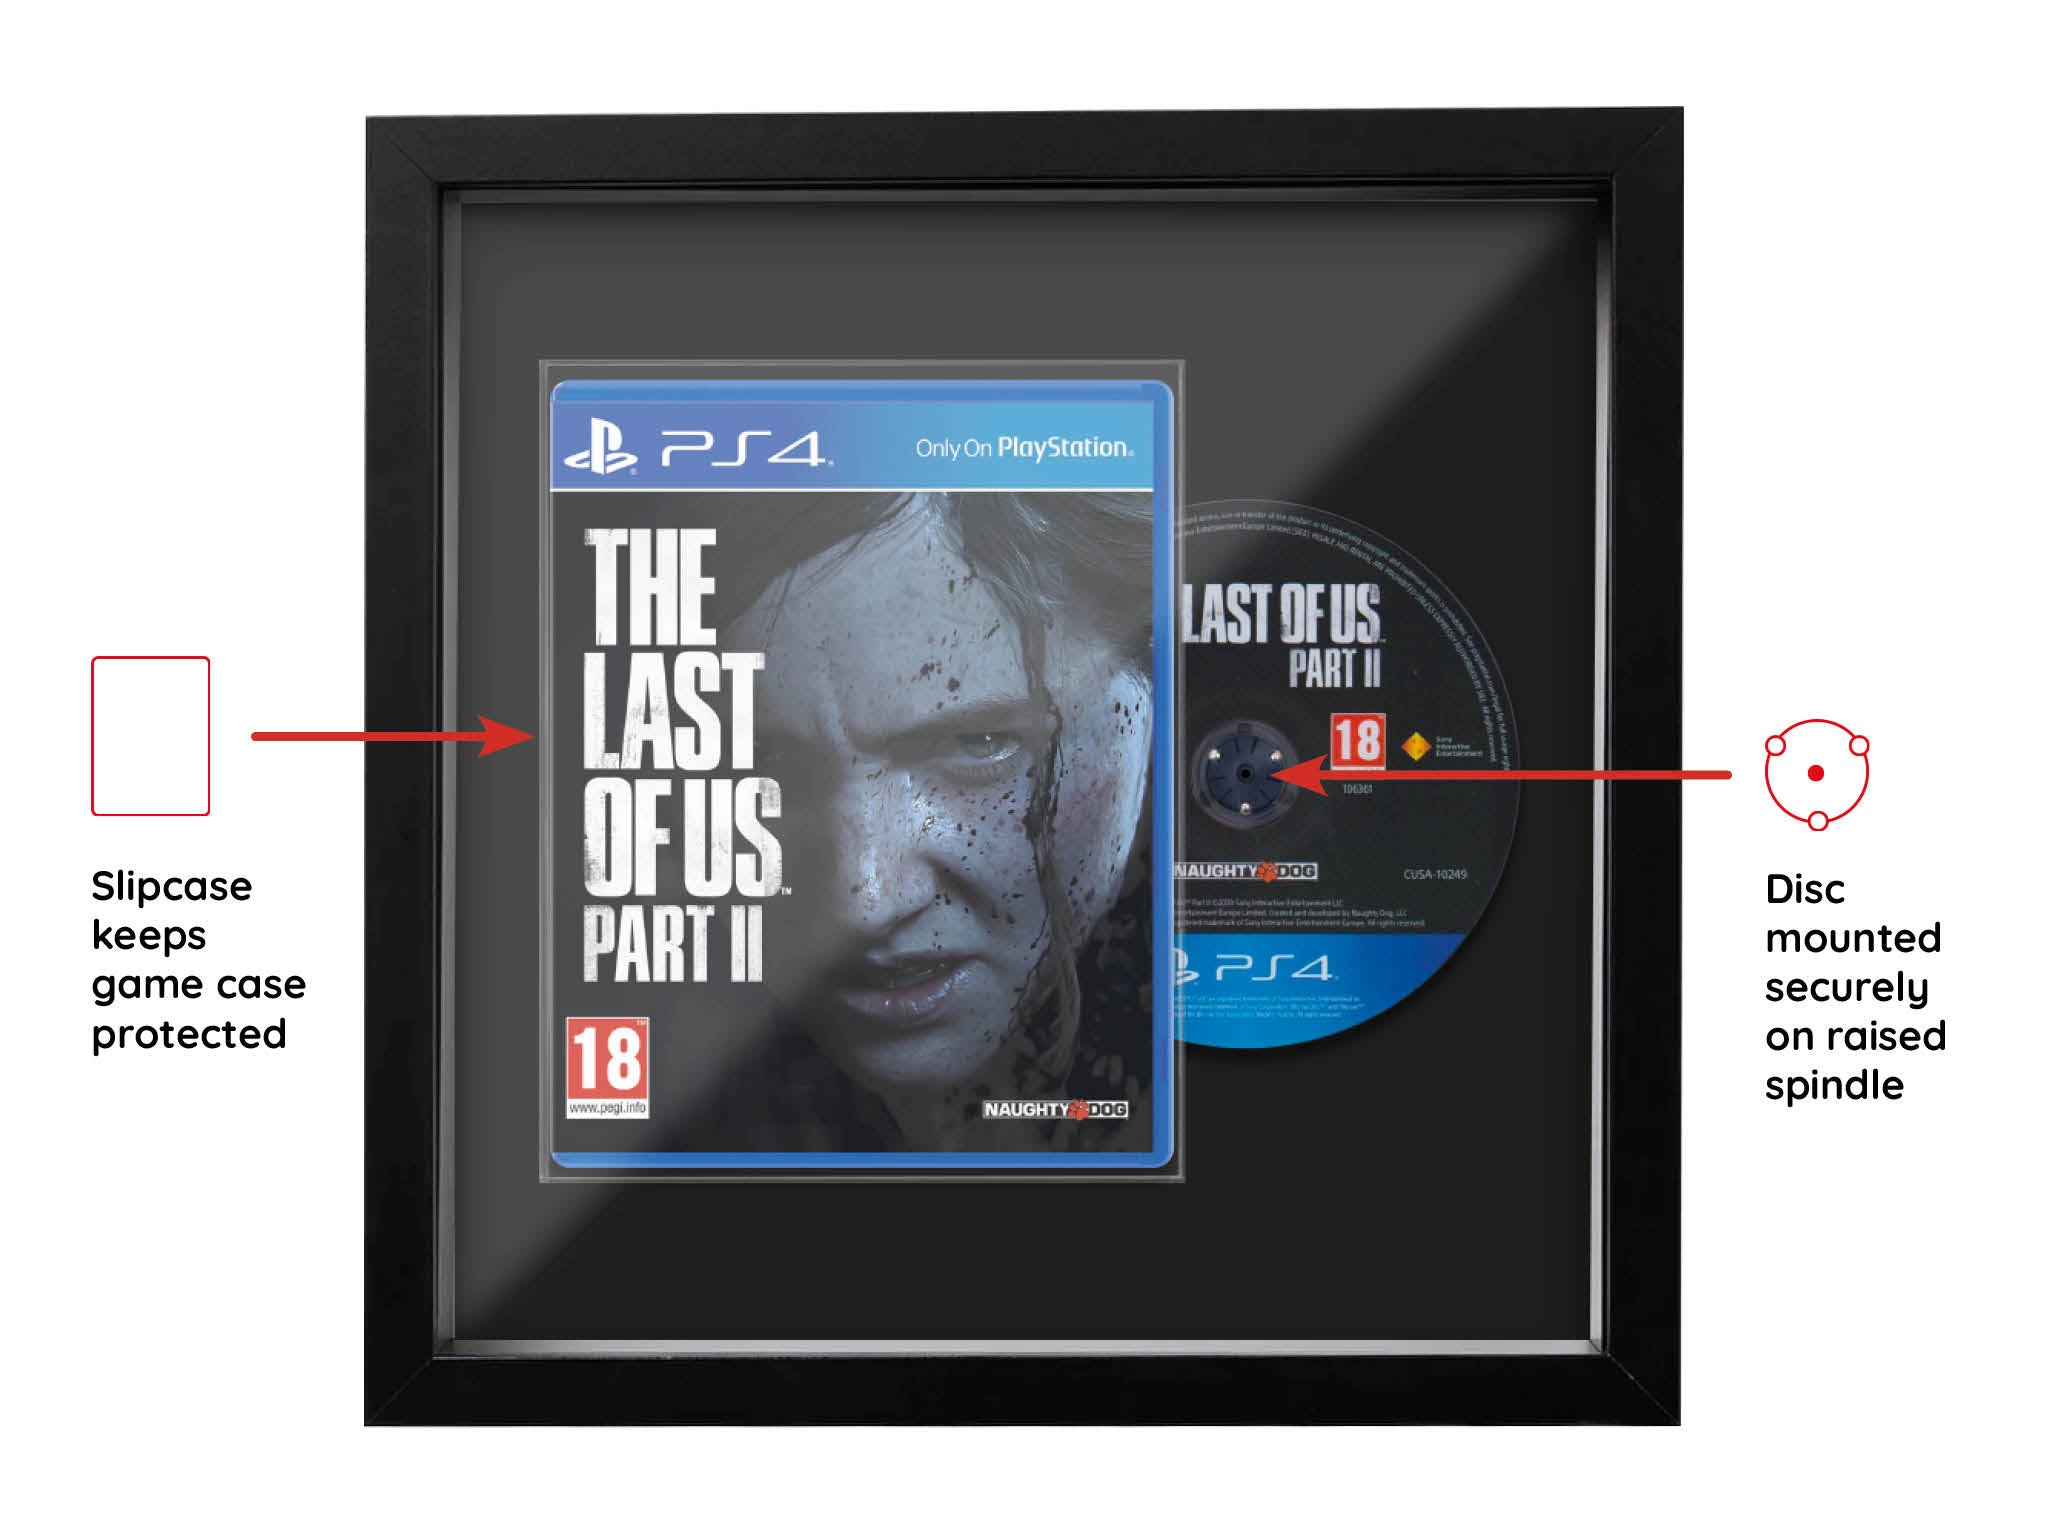 The Last of Us Part II (Combined Range) Framed Game - Frame-A-Game